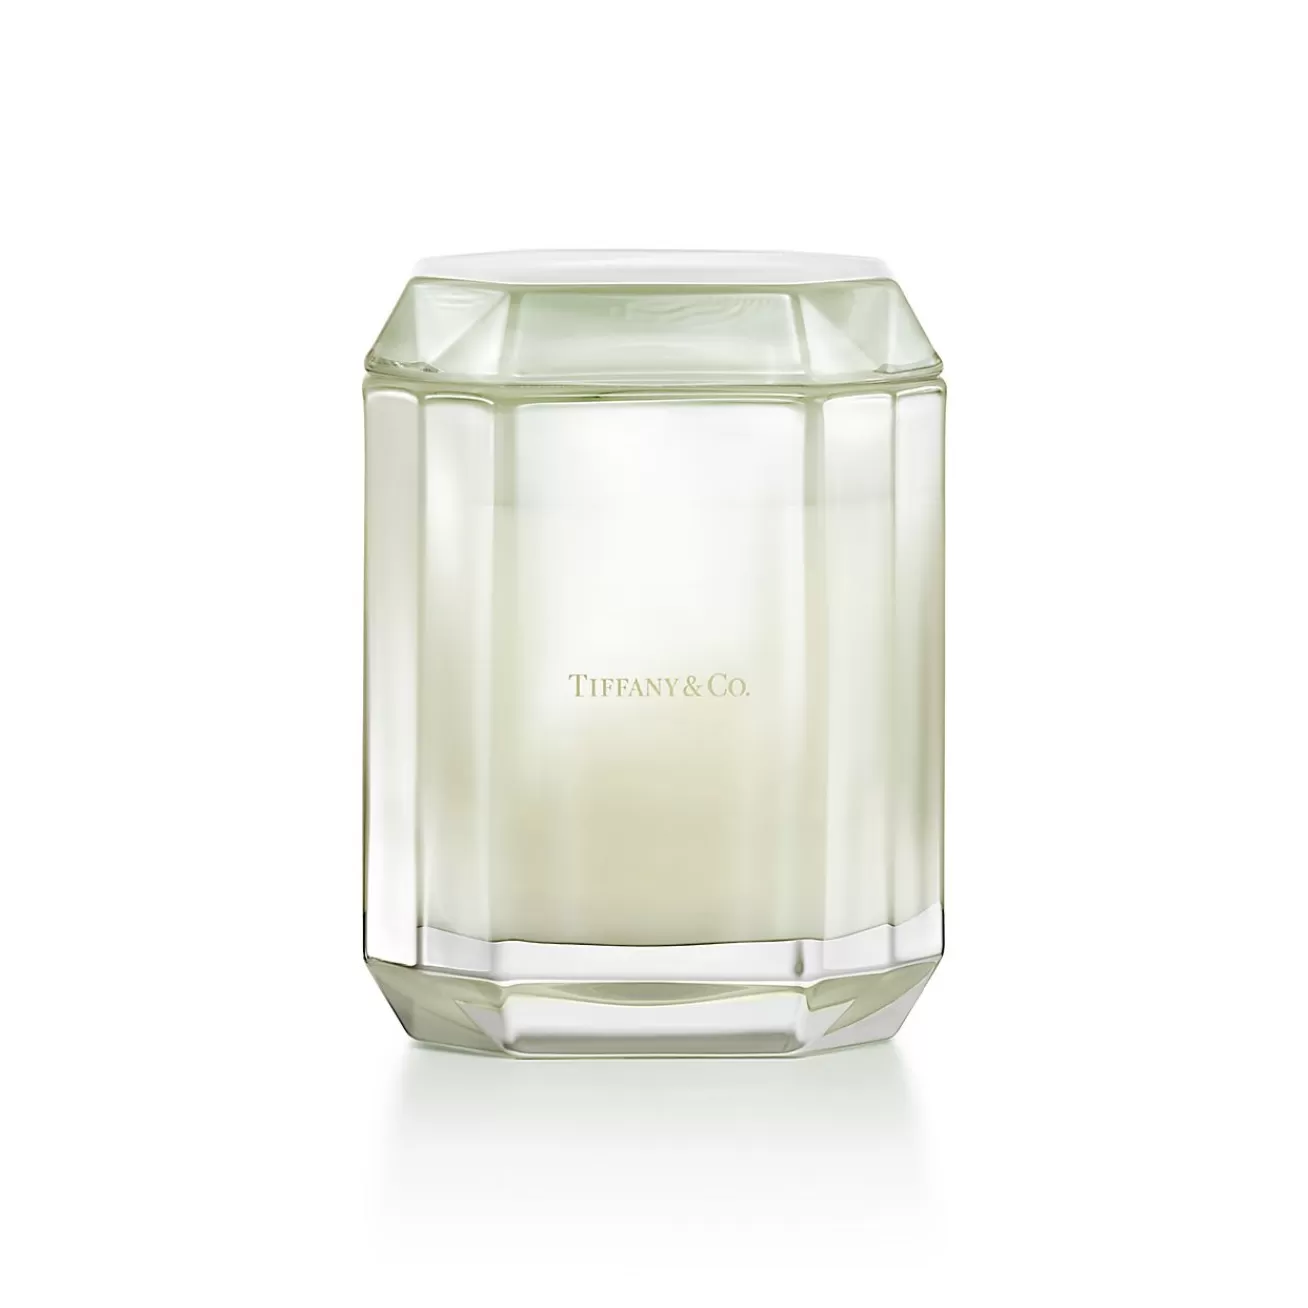 Tiffany & Co. Tiffany Facets The House of Tiffany Candle in Tsavorite-colored Glass | ^ The Home | Housewarming Gifts